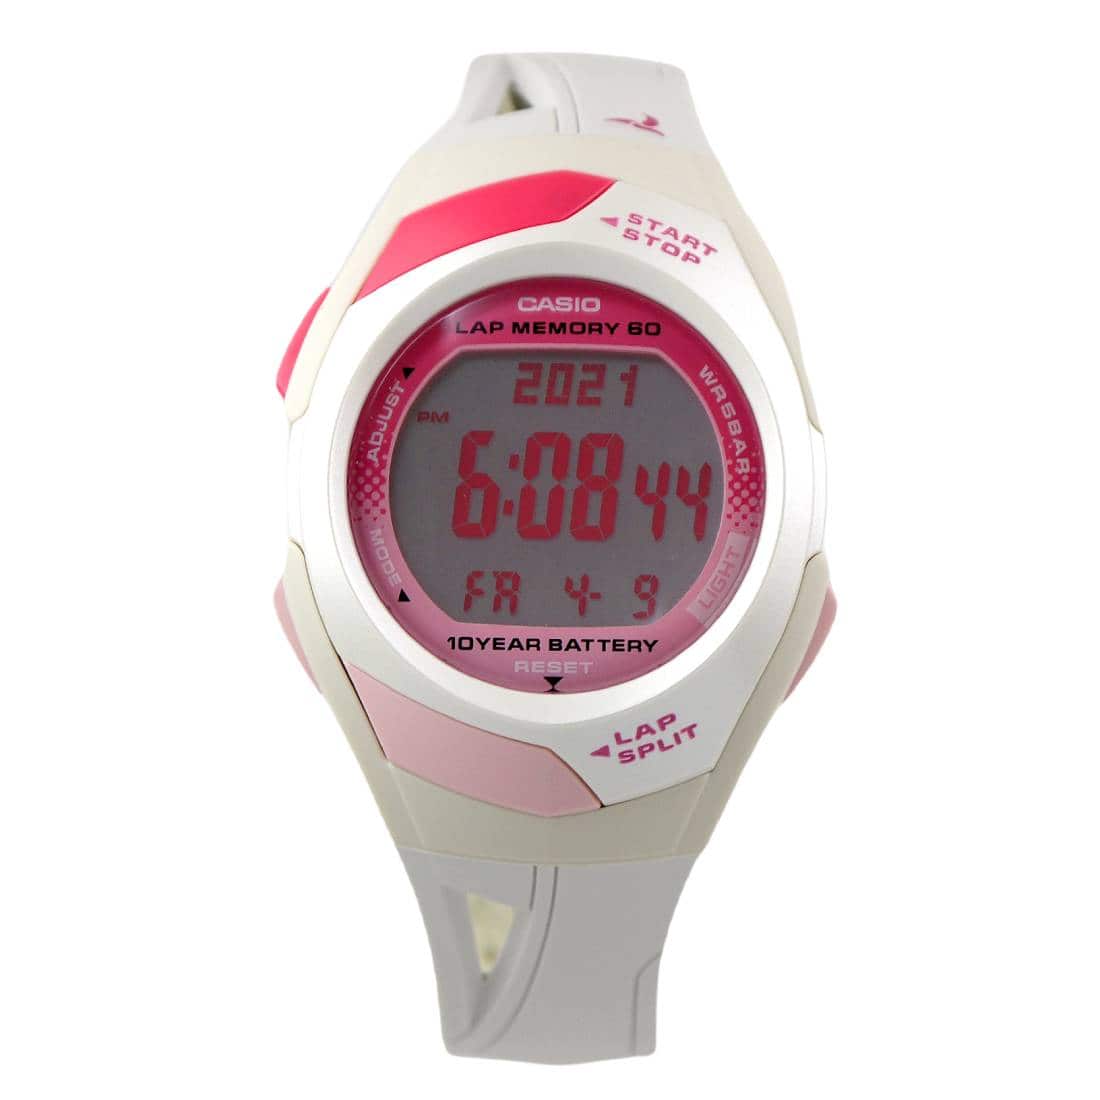 New]The product which is targeted for a campaign CASIO Casio PHYS fizz  STR-300-7 - BE FORWARD Store